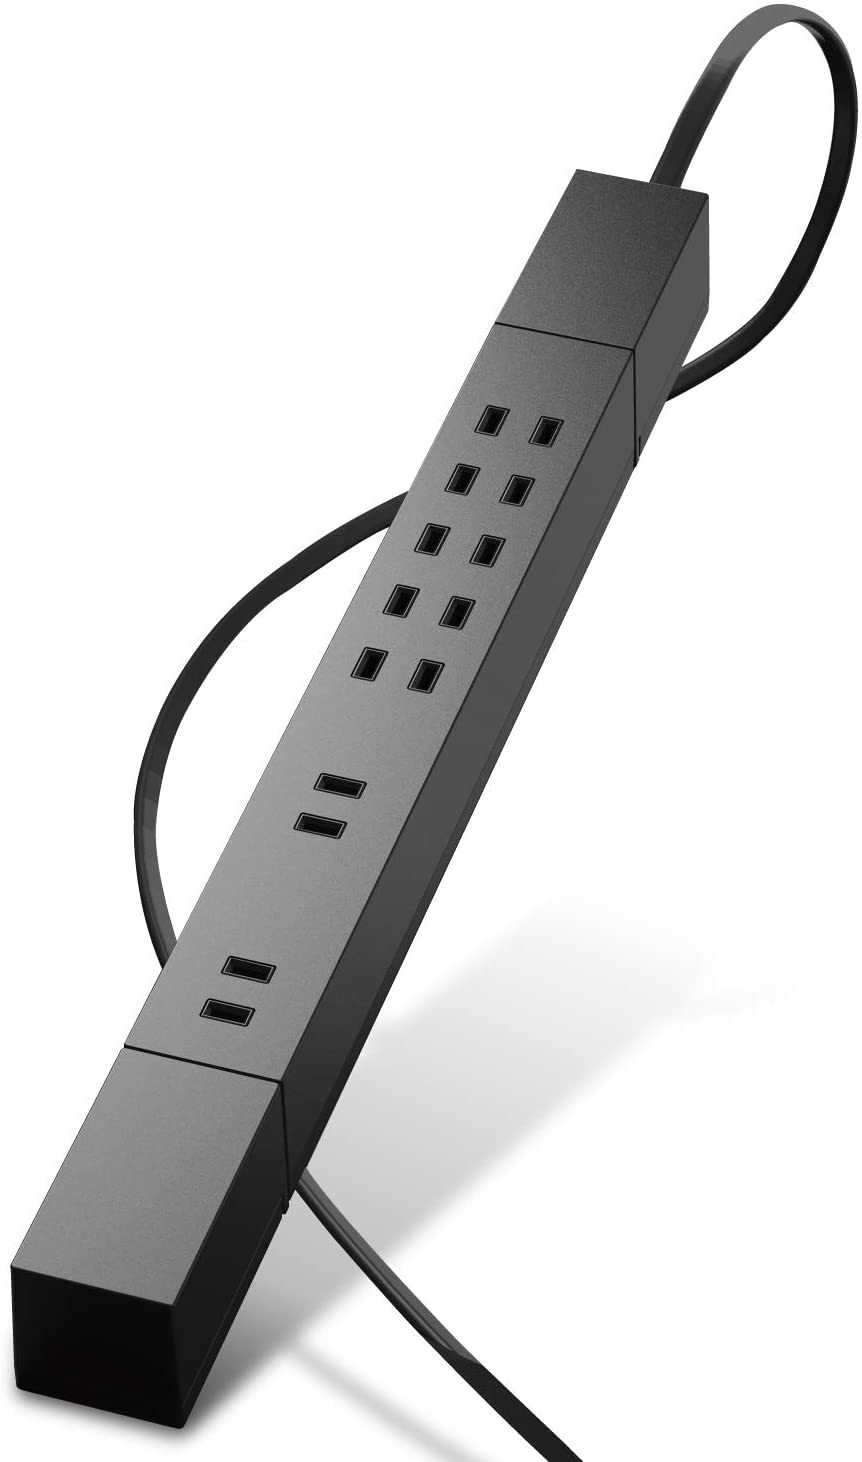 Double rotating power strip